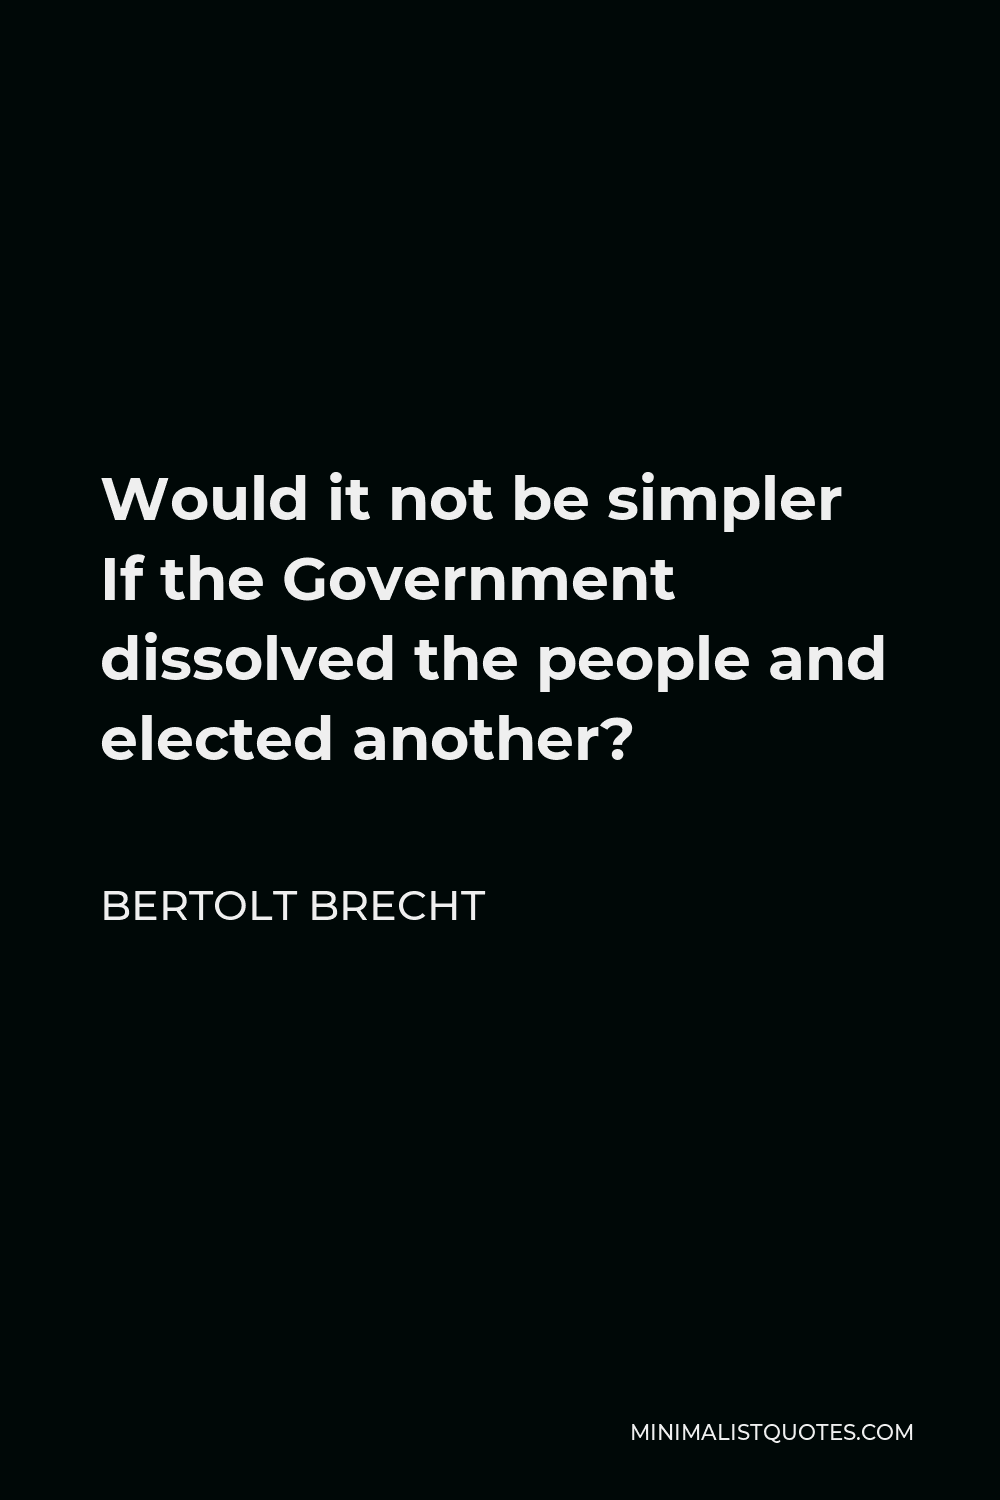 Bertolt Brecht Quote - Would it not be simpler If the Government dissolved the people and elected another?